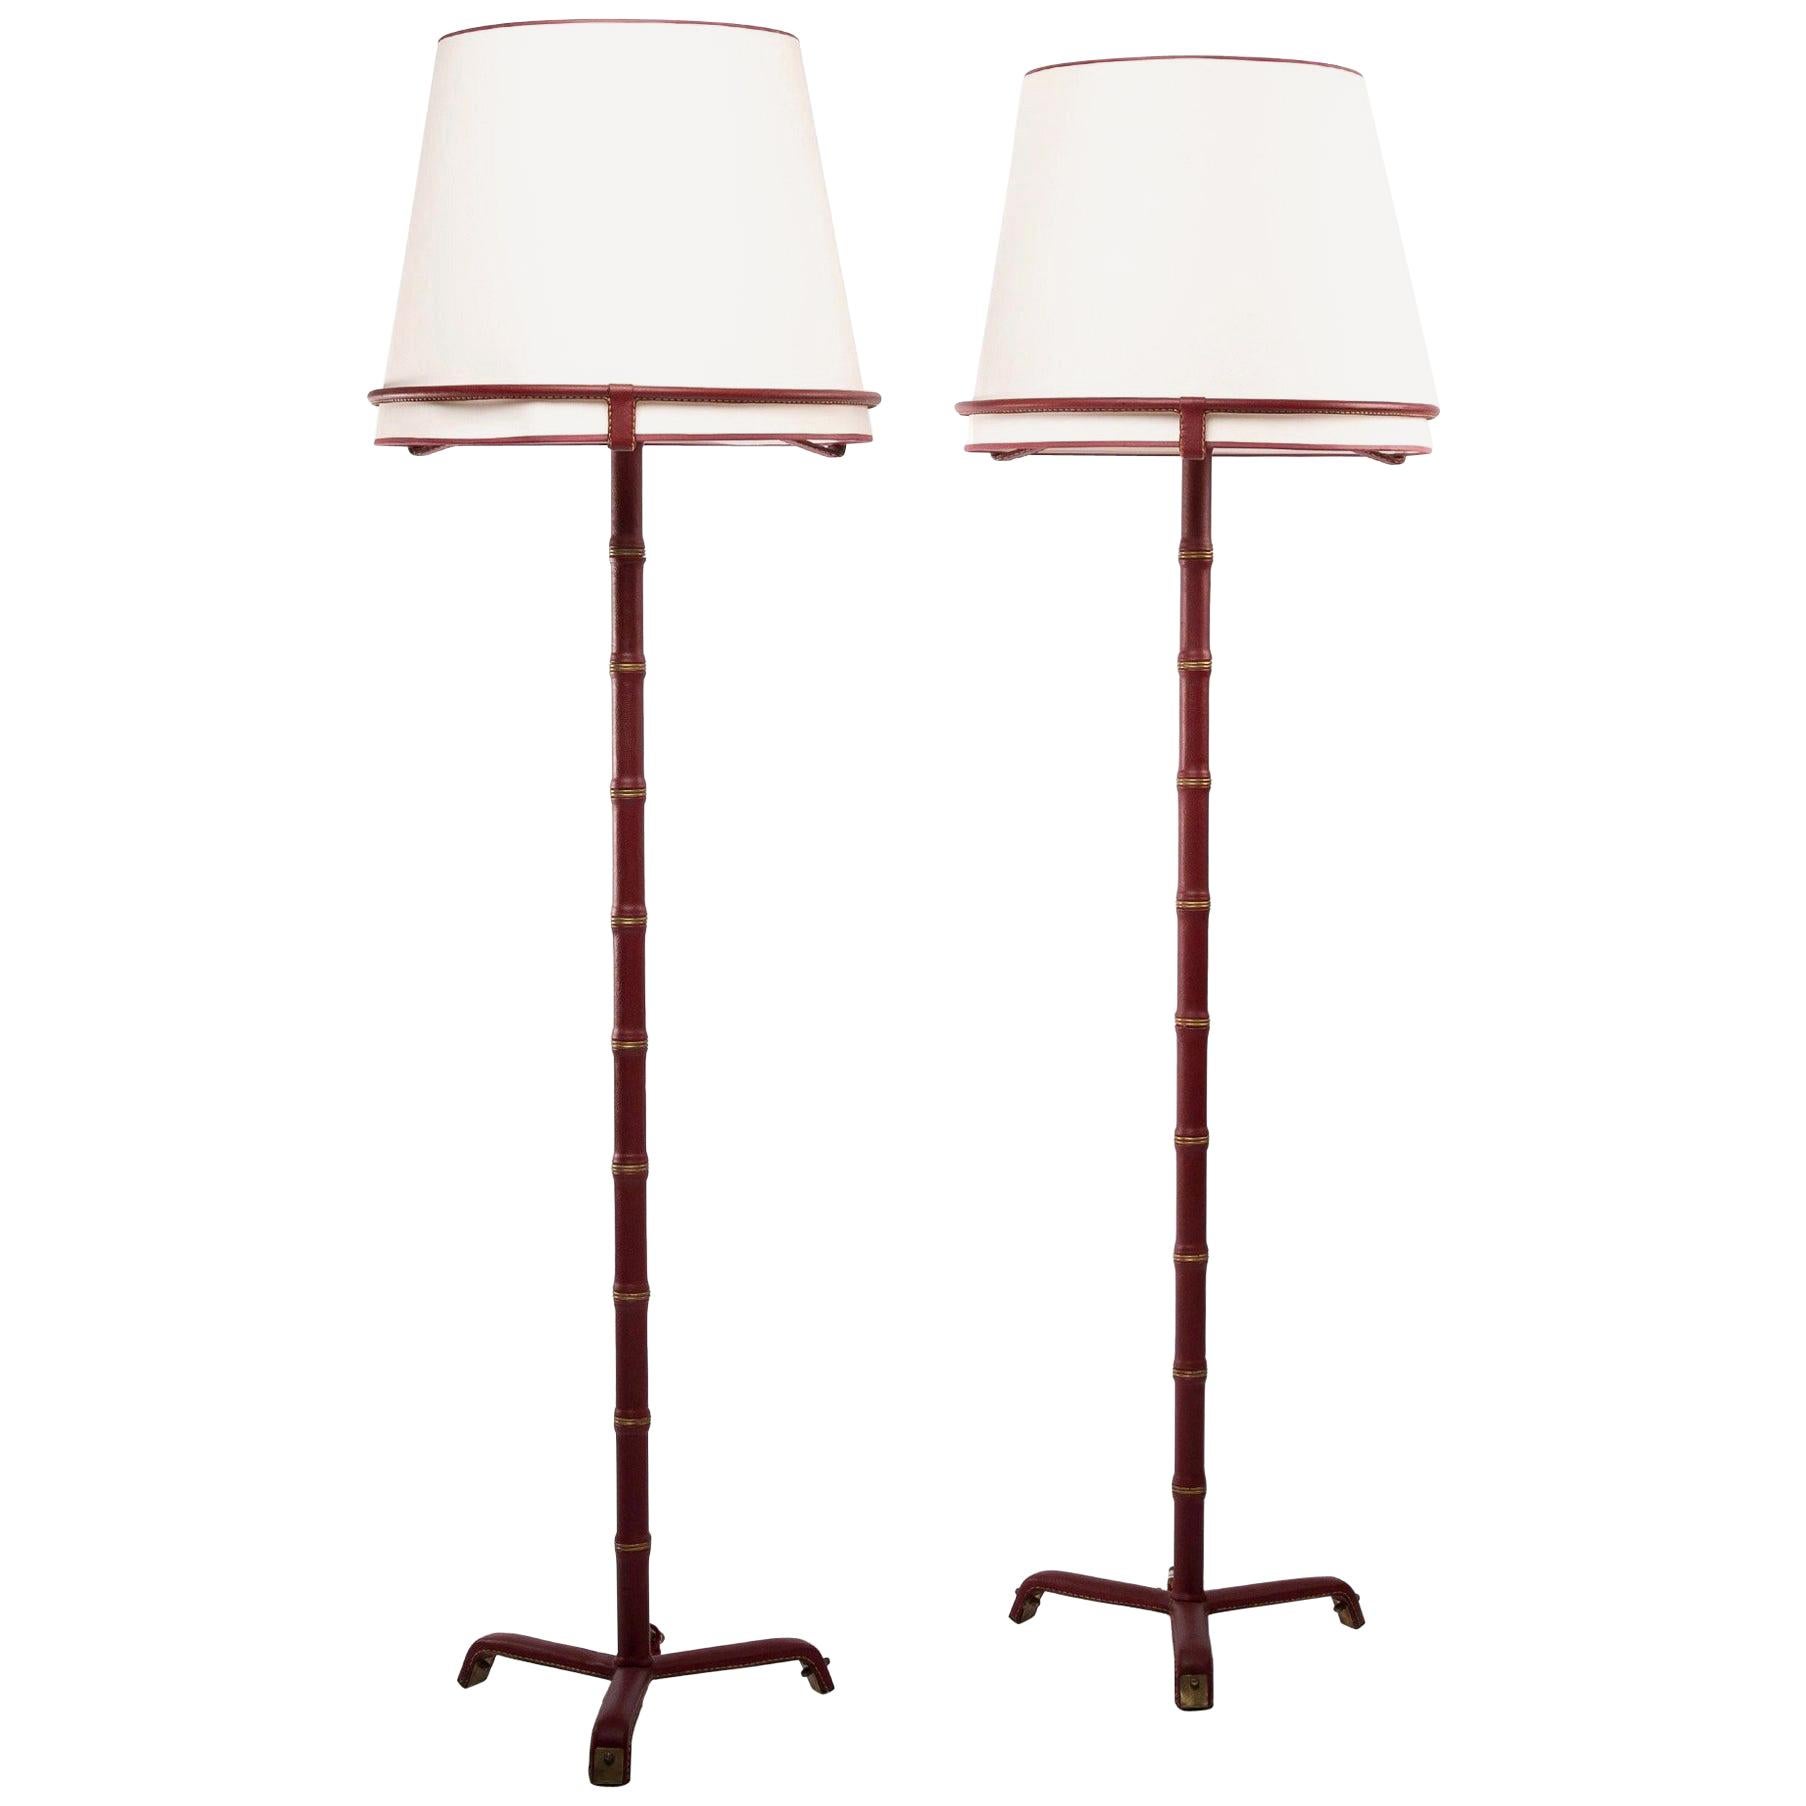 French Midcentury Pair of Floor Lamps, Jacques Adnet, Saddle Stitched Leather